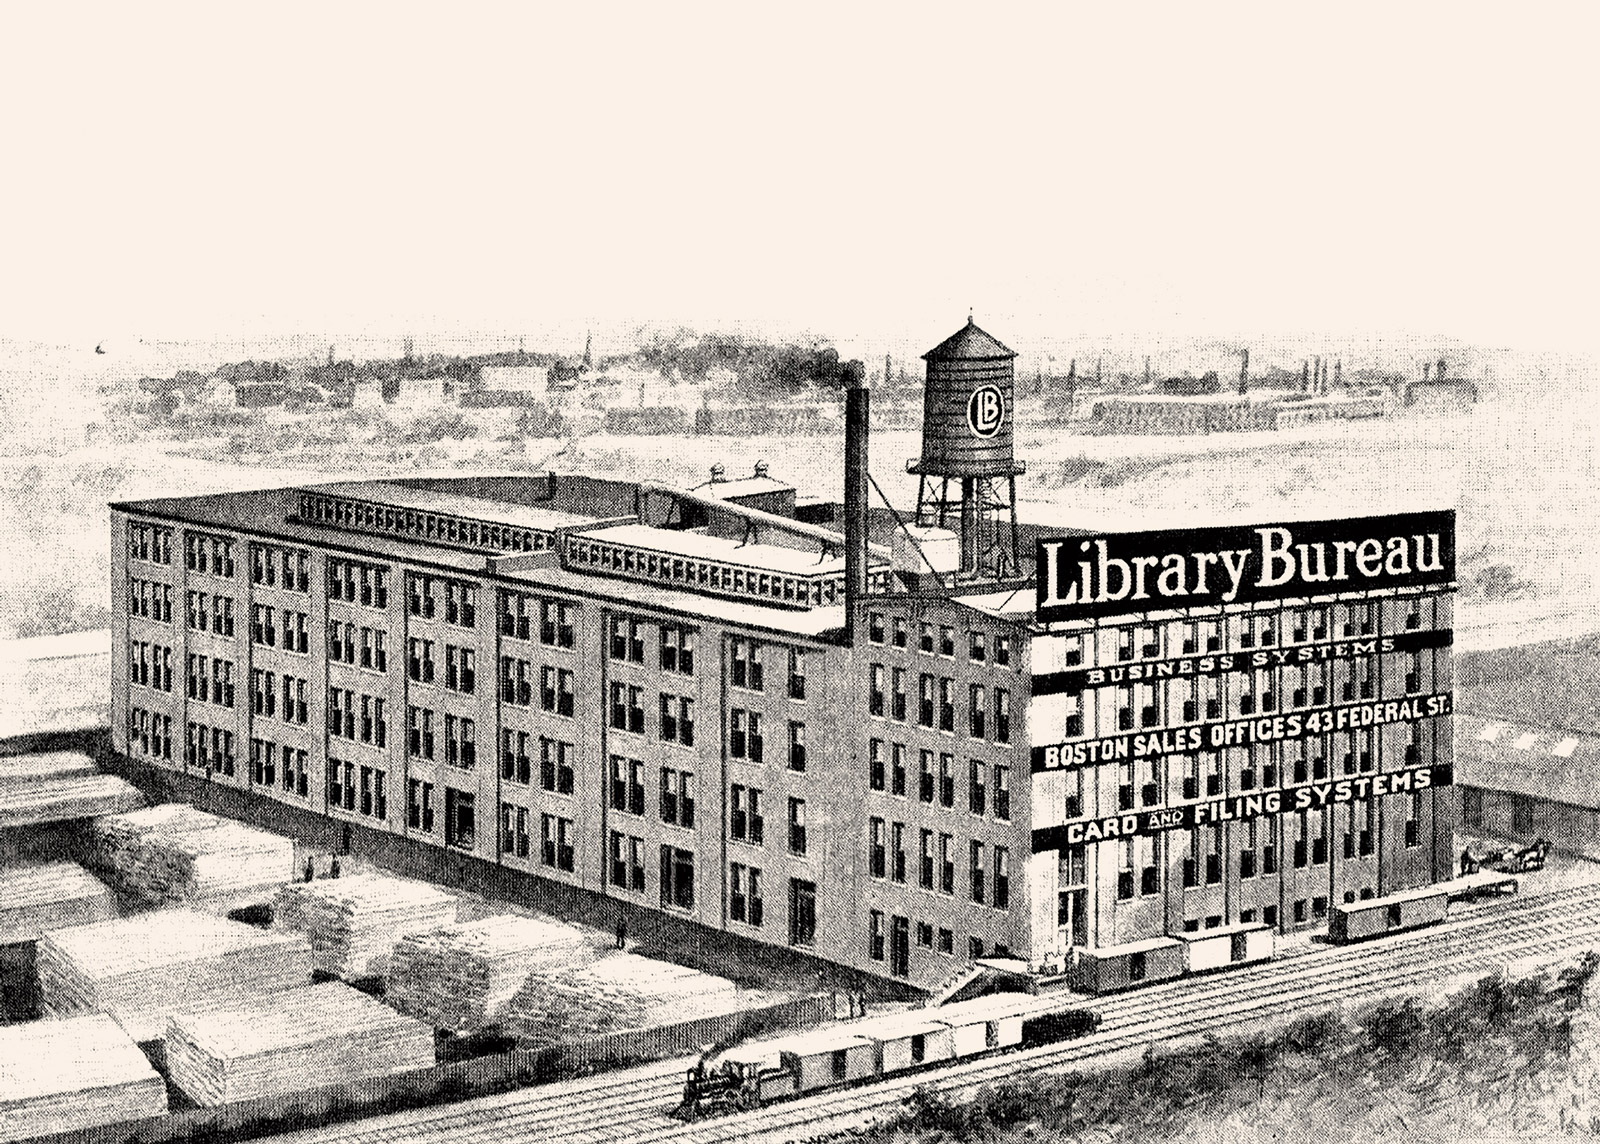 Library Bureau woodworking and card factory in Cambridge, Massachusetts. From The Story of Library Bureau, 1909.